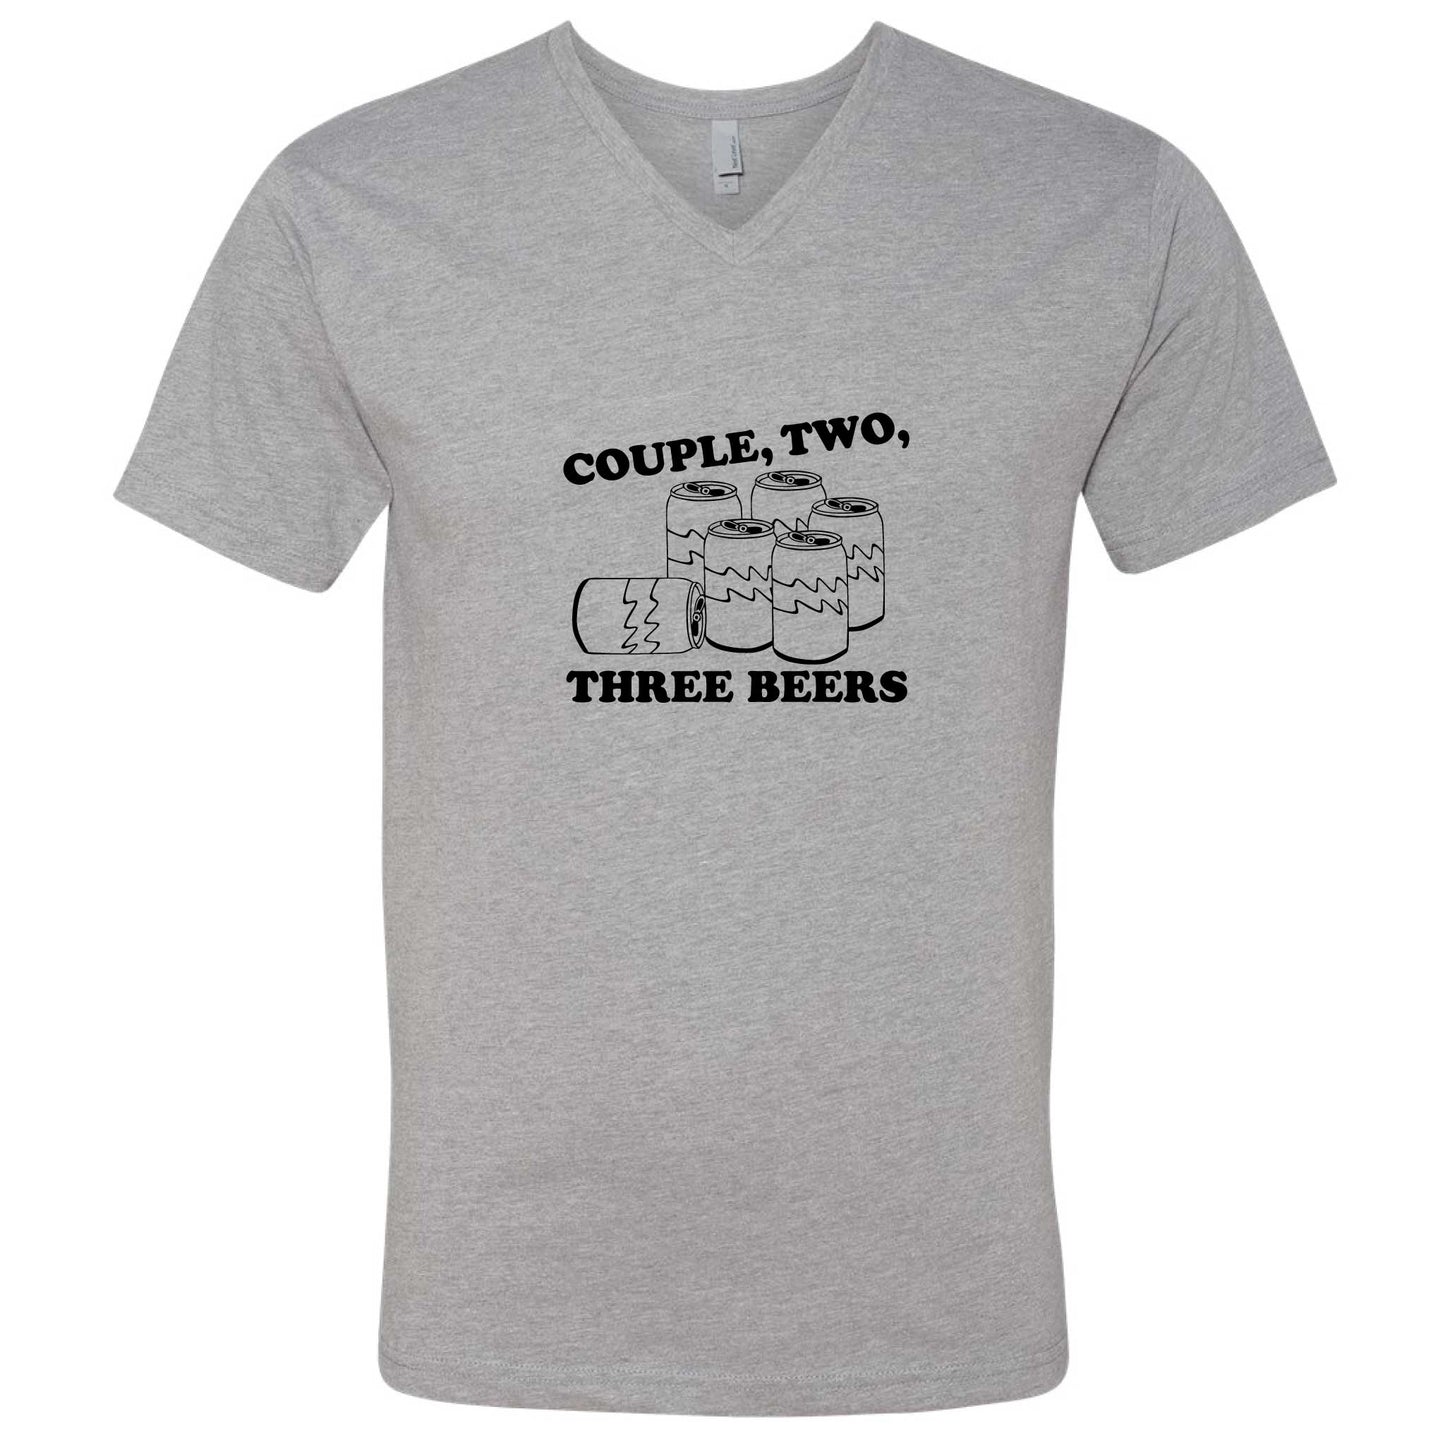 Couple, Two, Three Beers V-Neck T-Shirt